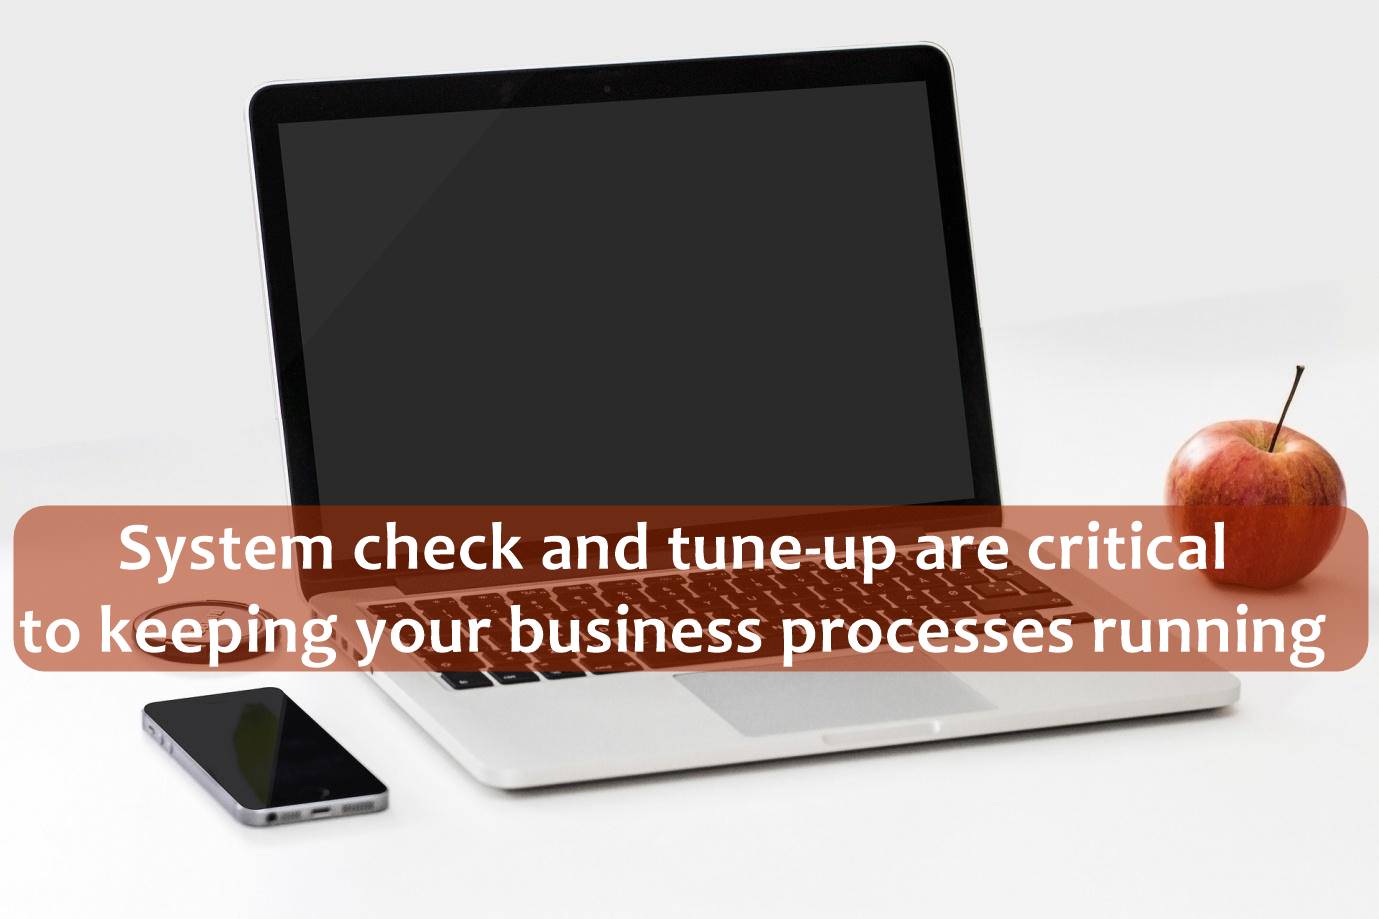 System check and tune-up are critical to keeping your business processes running